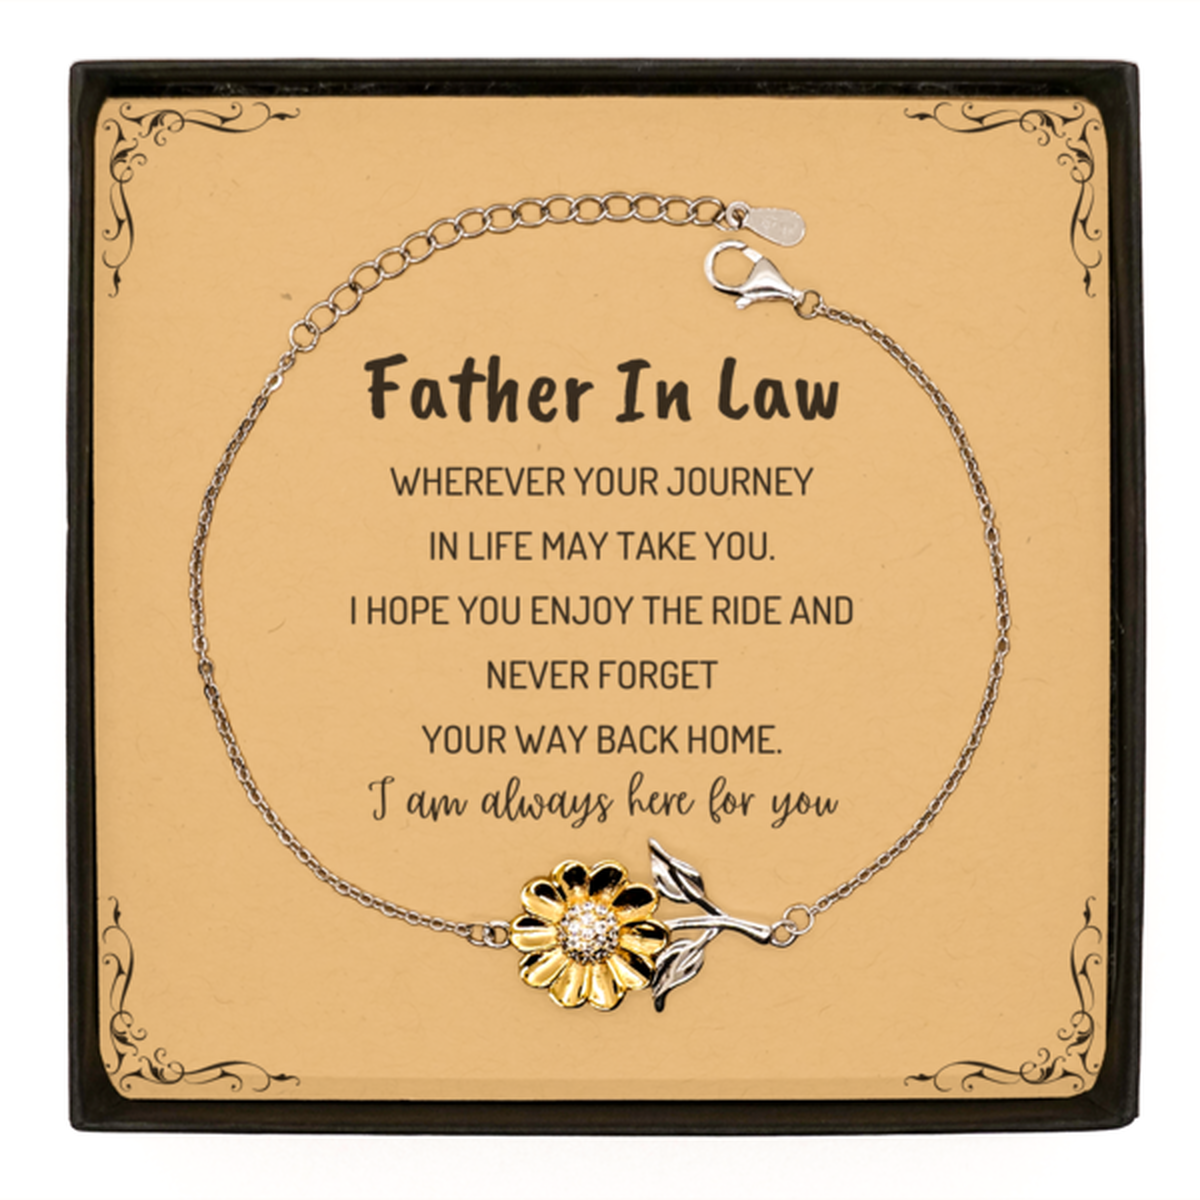 Father In Law wherever your journey in life may take you, I am always here for you Father In Law Sunflower Bracelet, Awesome Christmas Gifts For Father In Law Message Card, Father In Law Birthday Gifts for Men Women Family Loved One